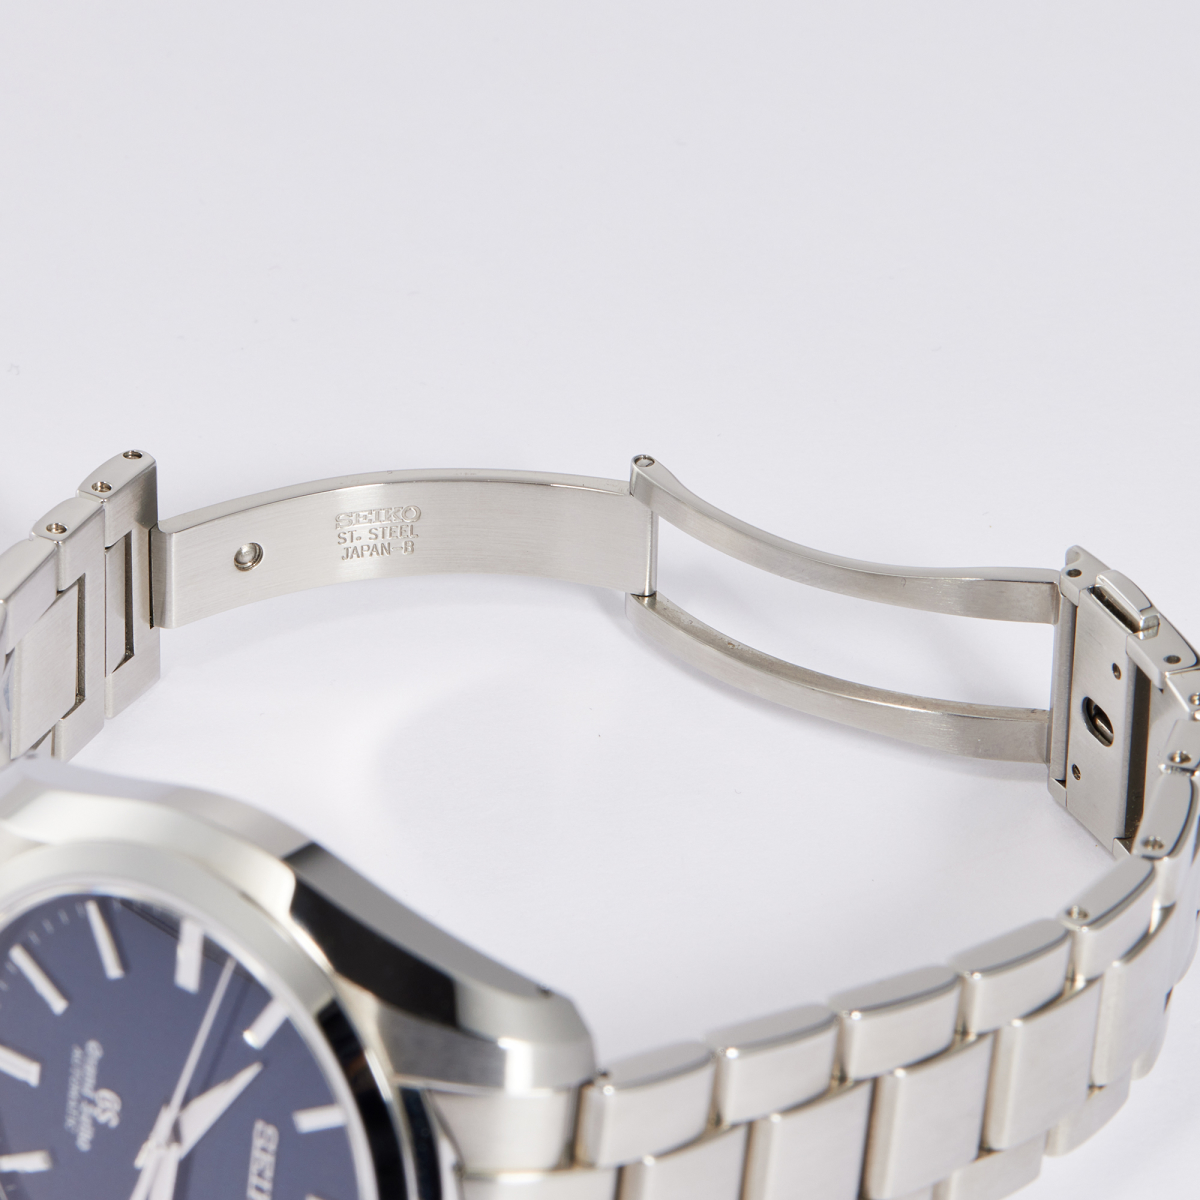 Automatic Stainless Steel Blue Motif Dial 55th Anniversary Limited Edition